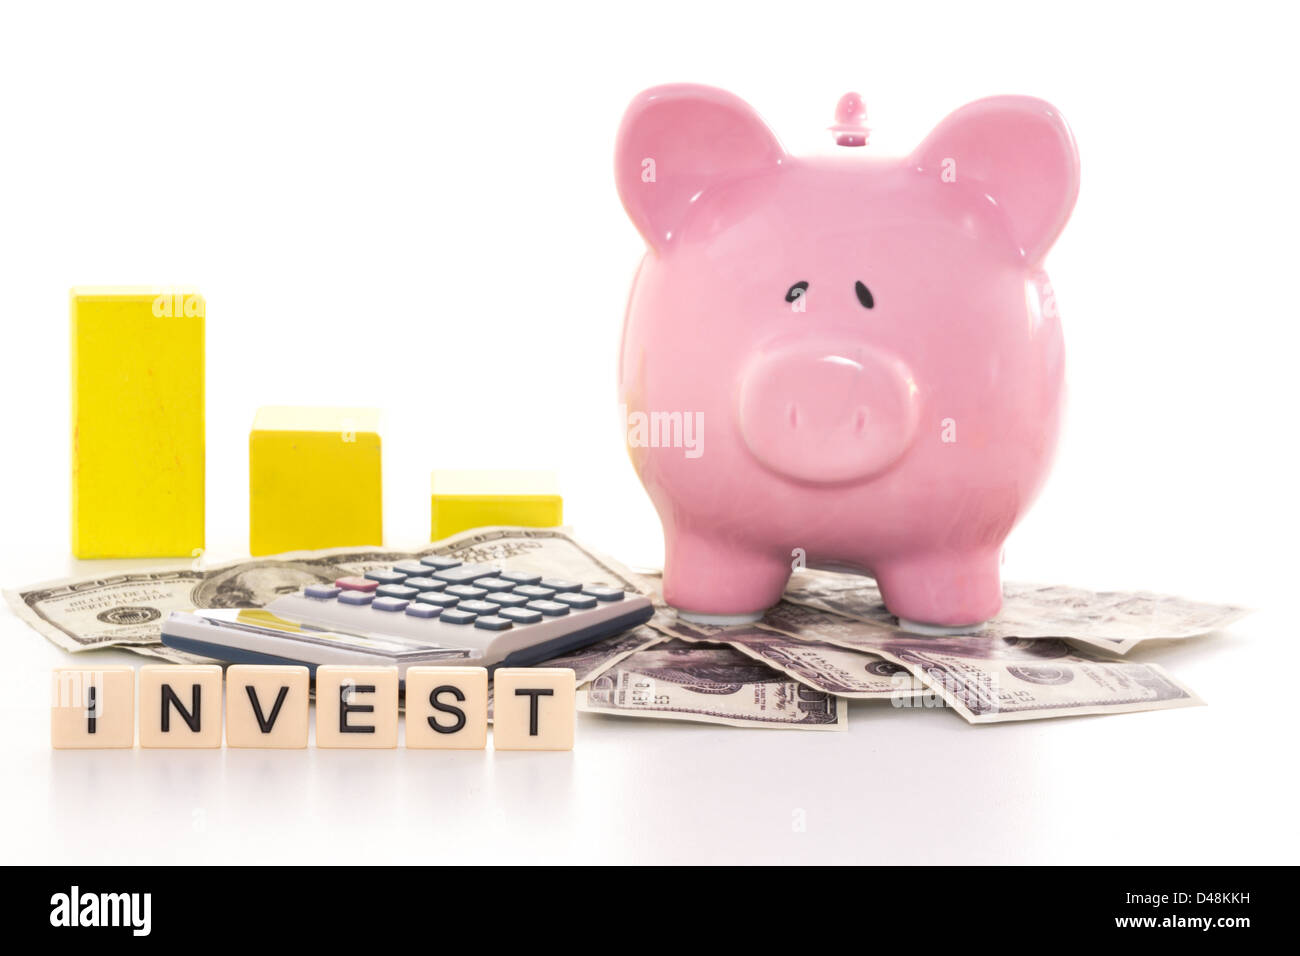 Piggy bank beside graph, calculator and invest spelled out in plastic letter pieces Stock Photo